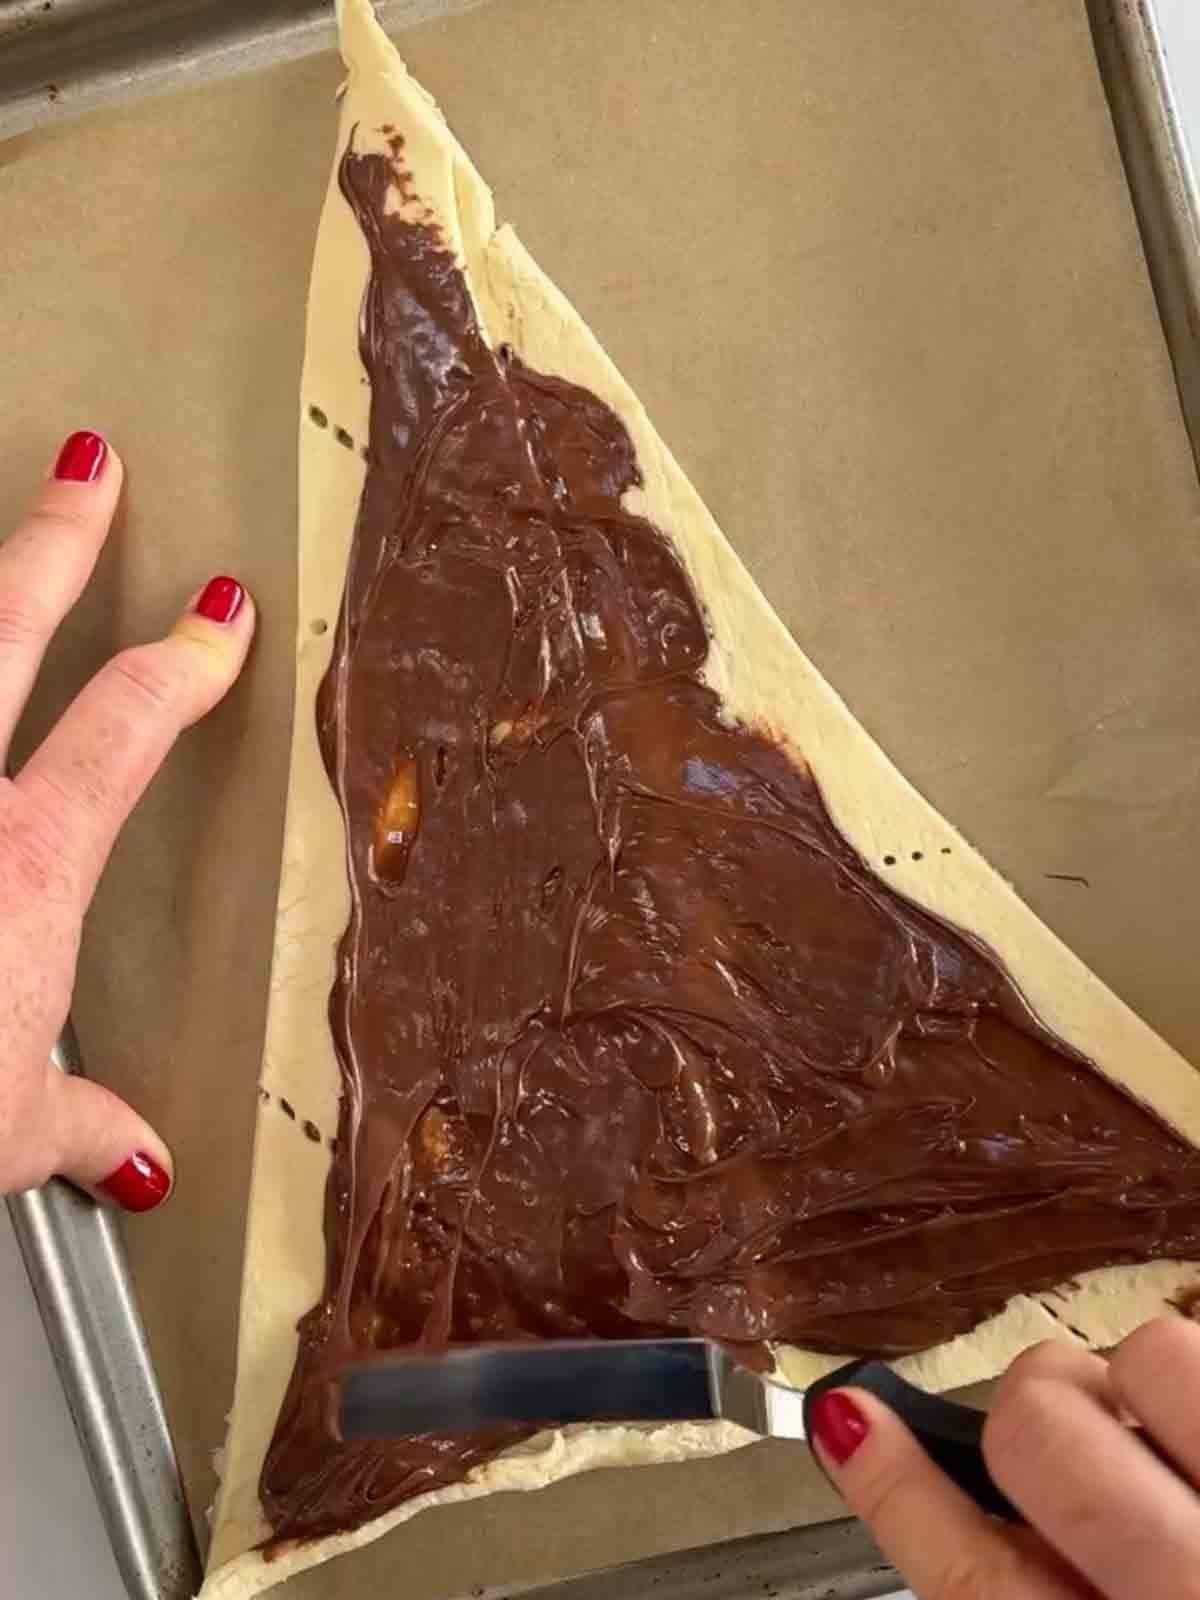 A triangle of croissant dough being smothered with nutella for the recipe Nutella Christmas Tree.